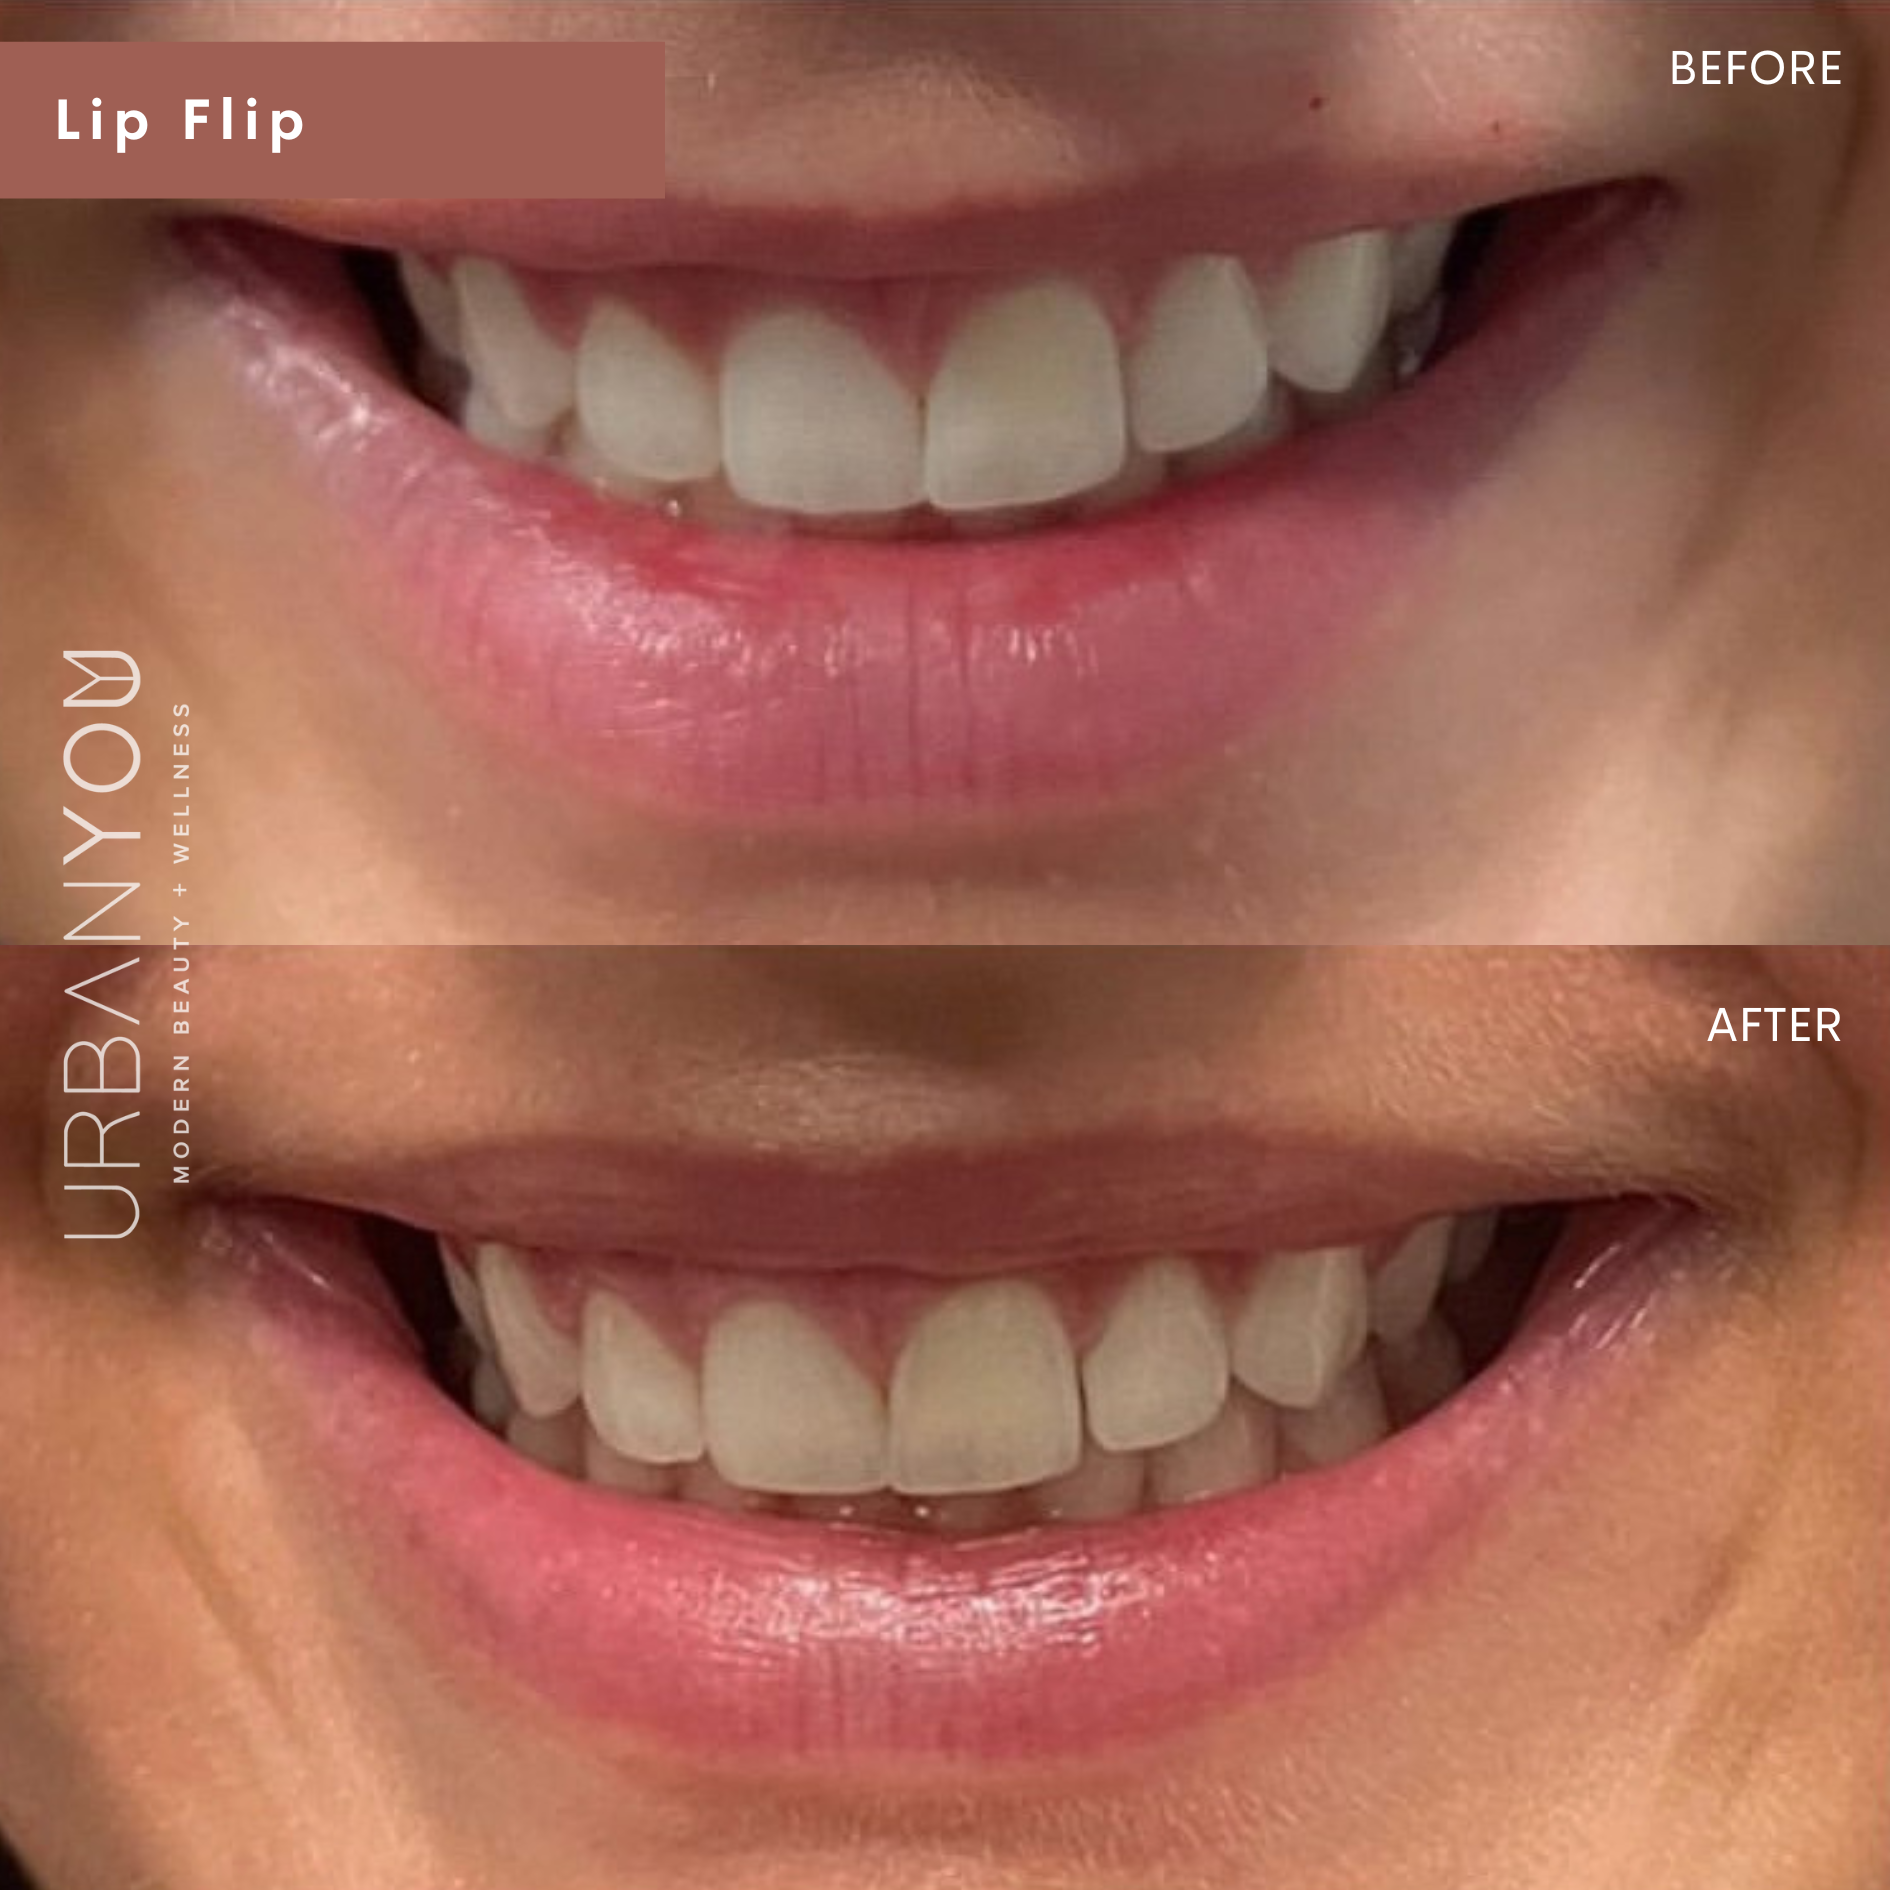 Lip flip with botox cosmetic before and after photo at urban you medical spa in northville and grand rapids michigan